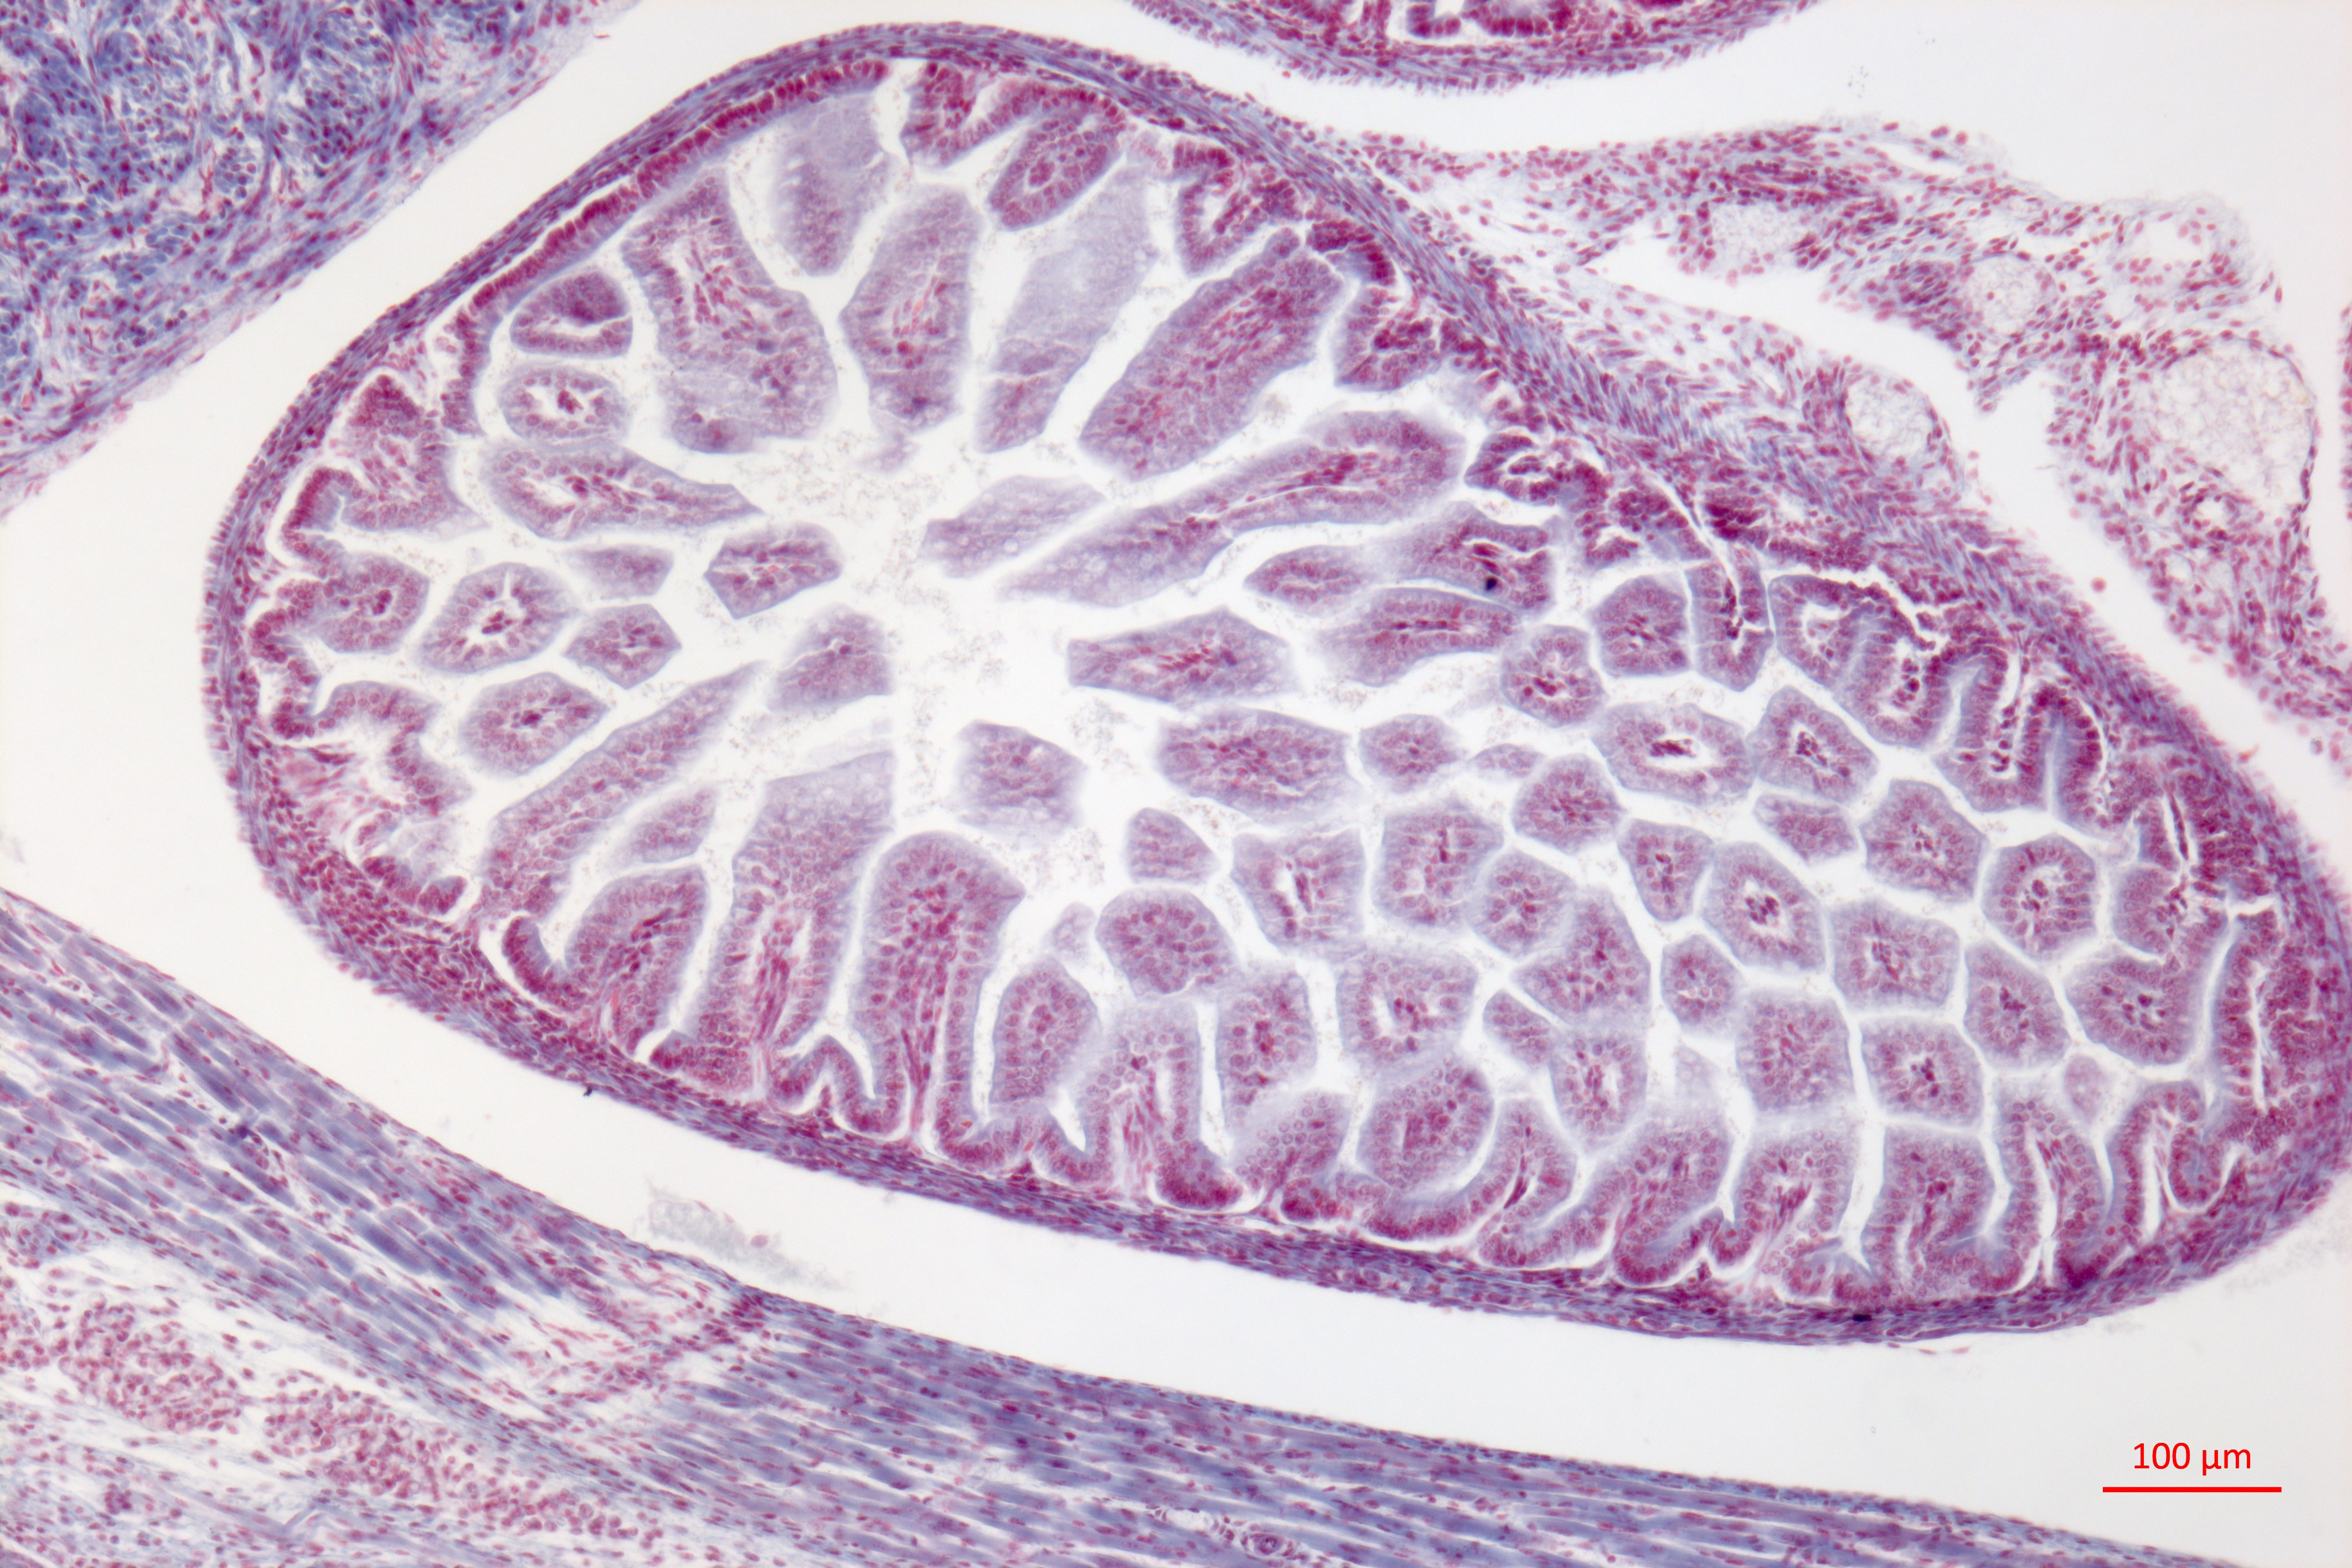 Mouse tissue, stained histology preparation (23782972906)